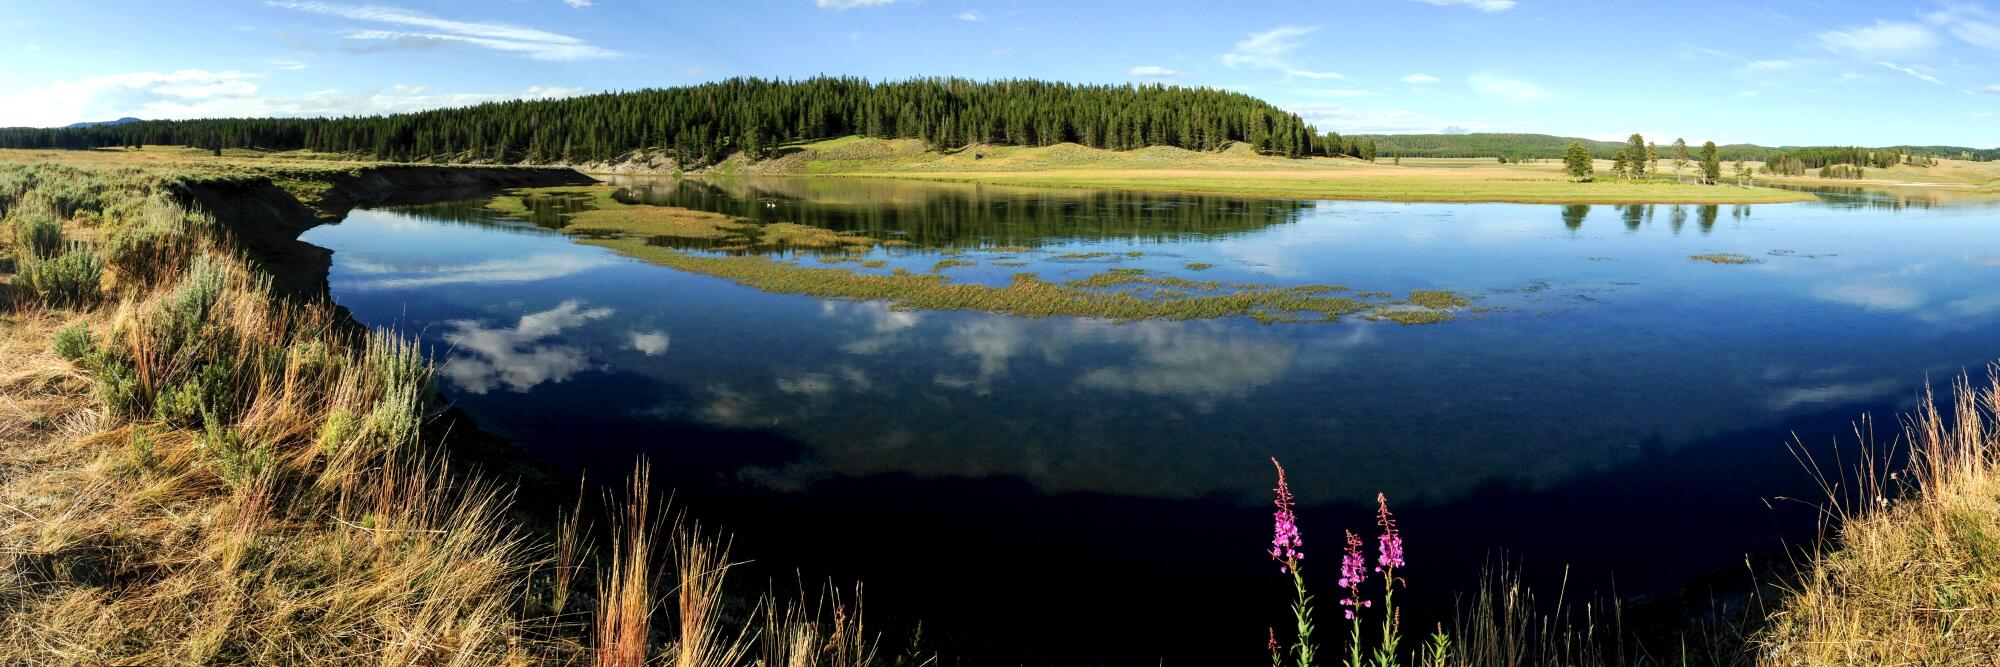 Hayden Valley, Yellowstone National Park, with a water body surrounded by trees and grassy land.